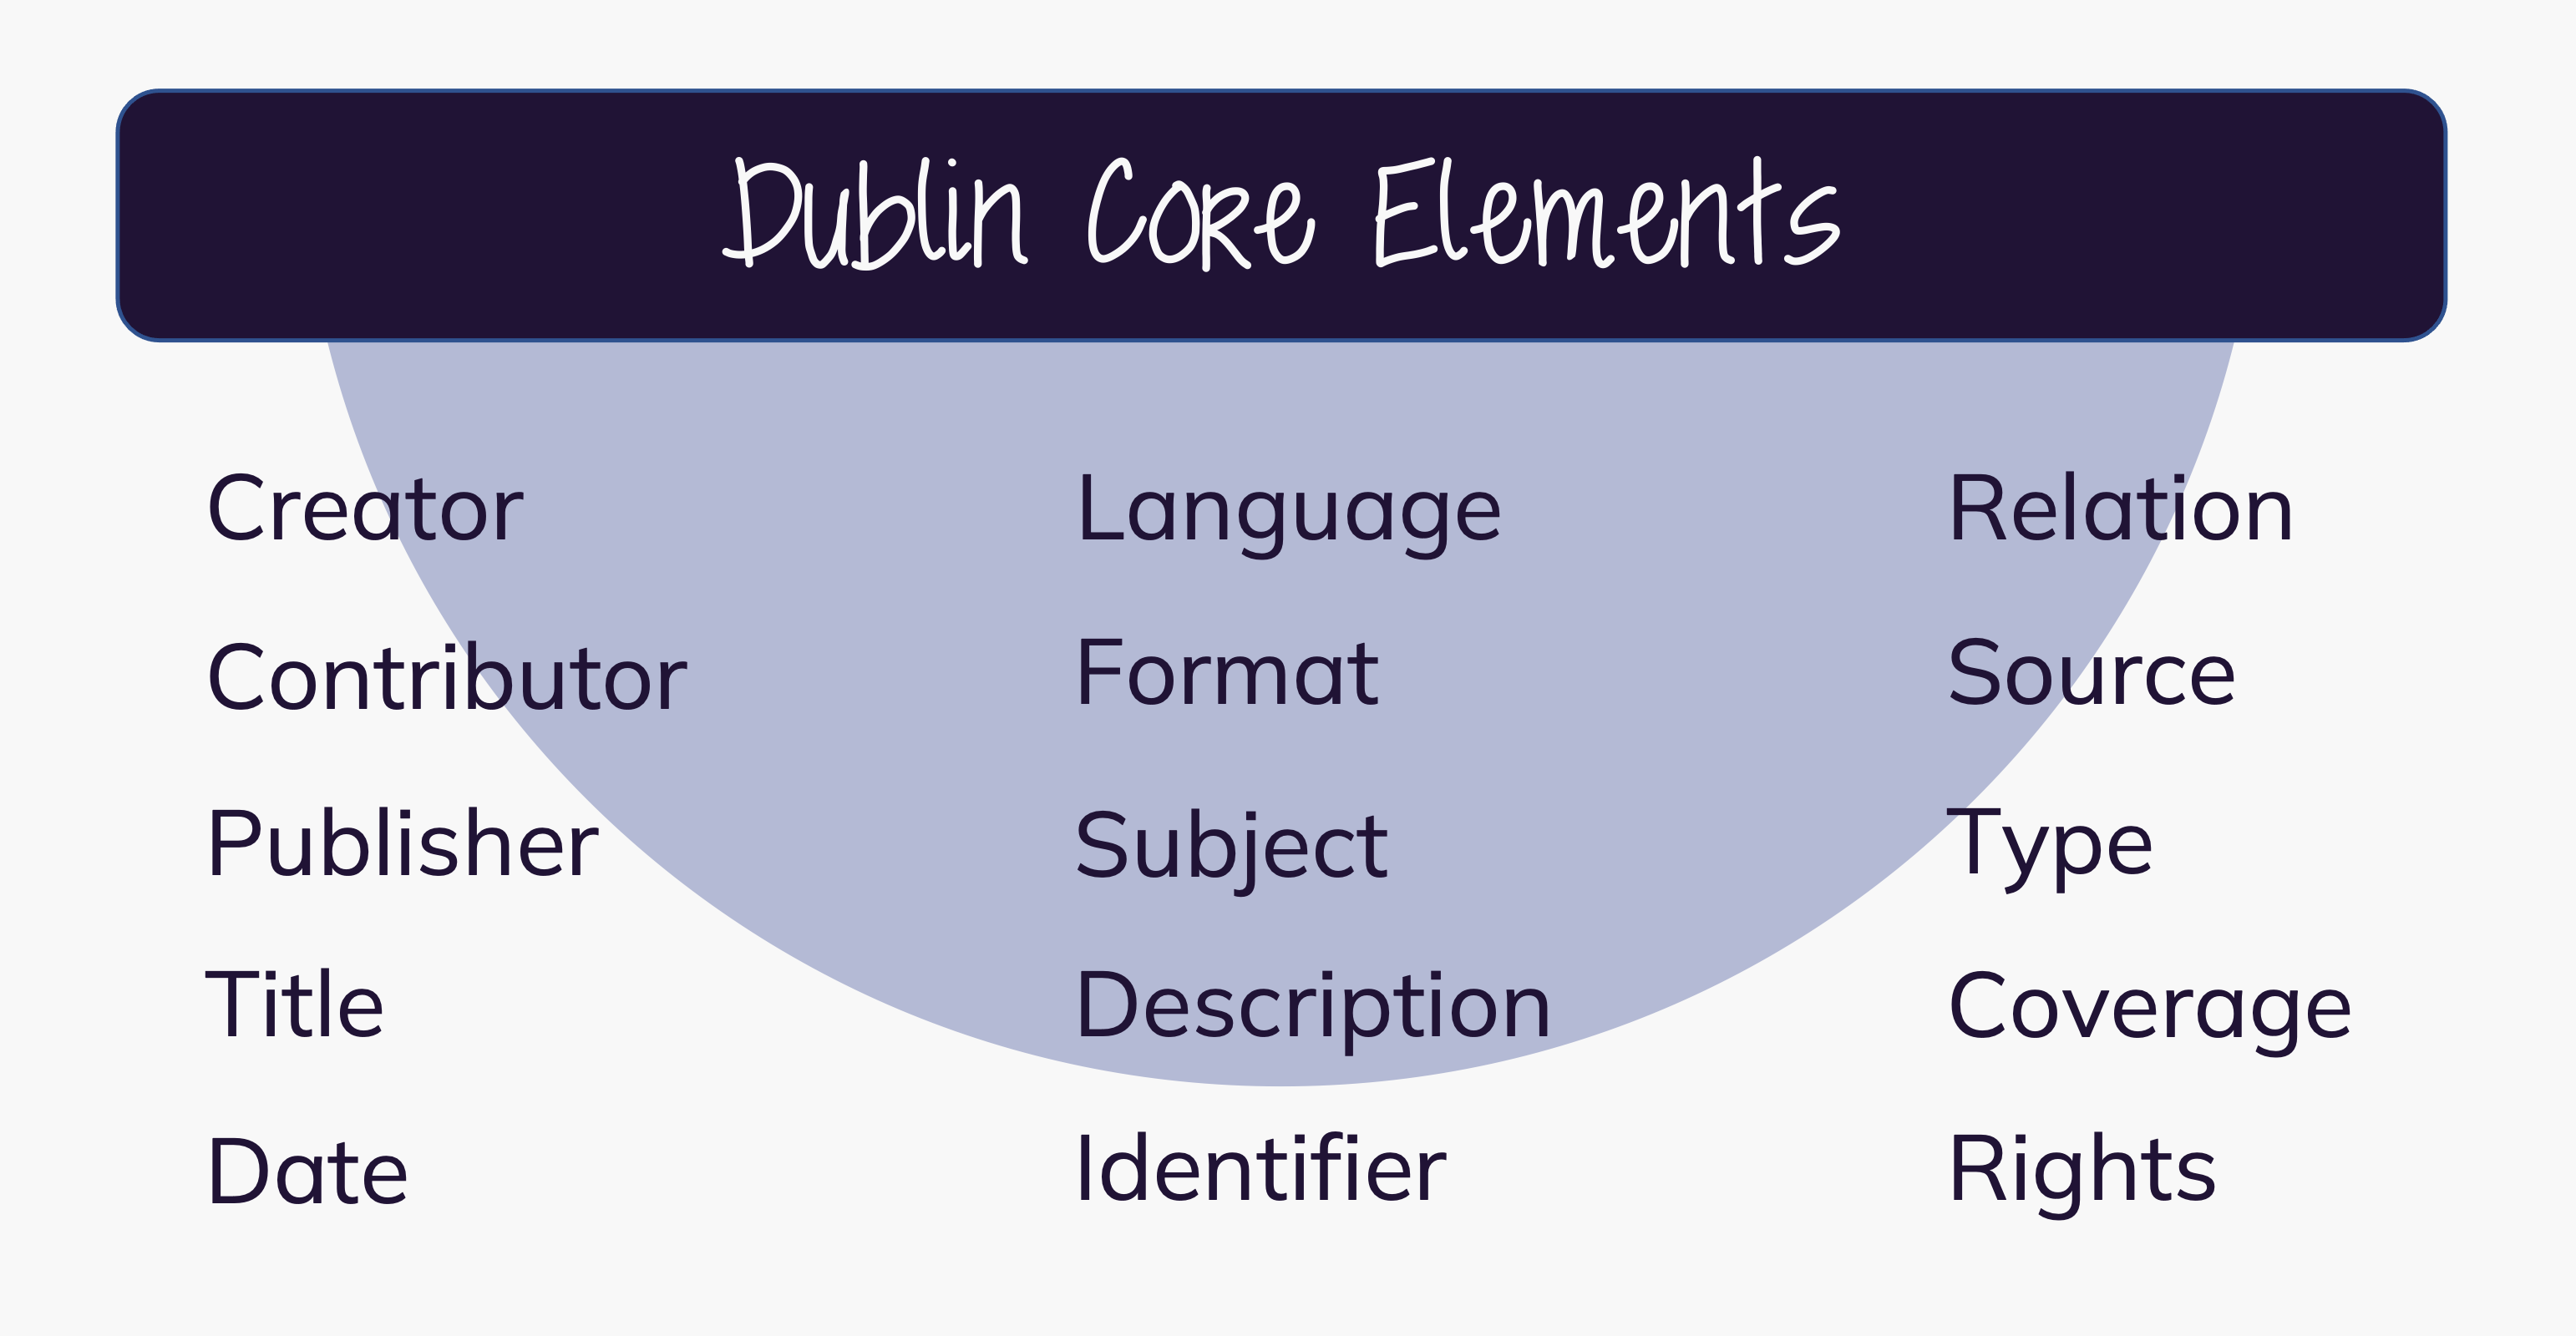 Depiction of the 15 Dublin Core Elements: Creator, Contributor, Publisher, Title, Date, Language, Format, Subject, Description, Identifier, Relation, Source, Type, Coverage, Rights